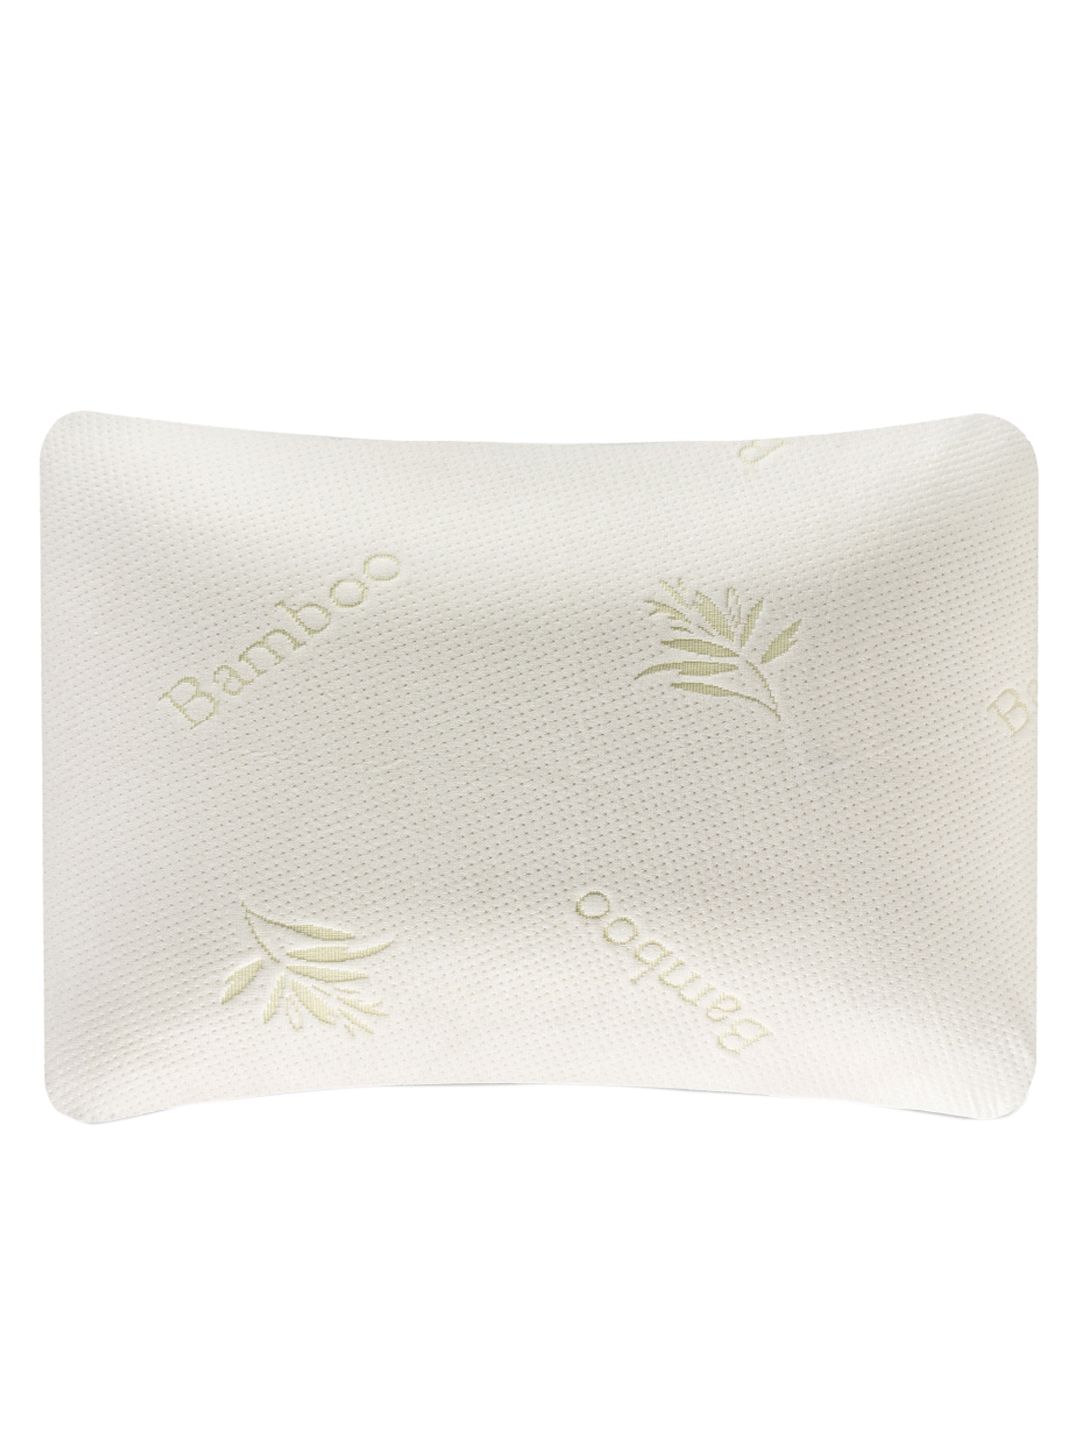 The White Willow White Dual Sided Cooling Gel Memory Foam Pillow Price in India